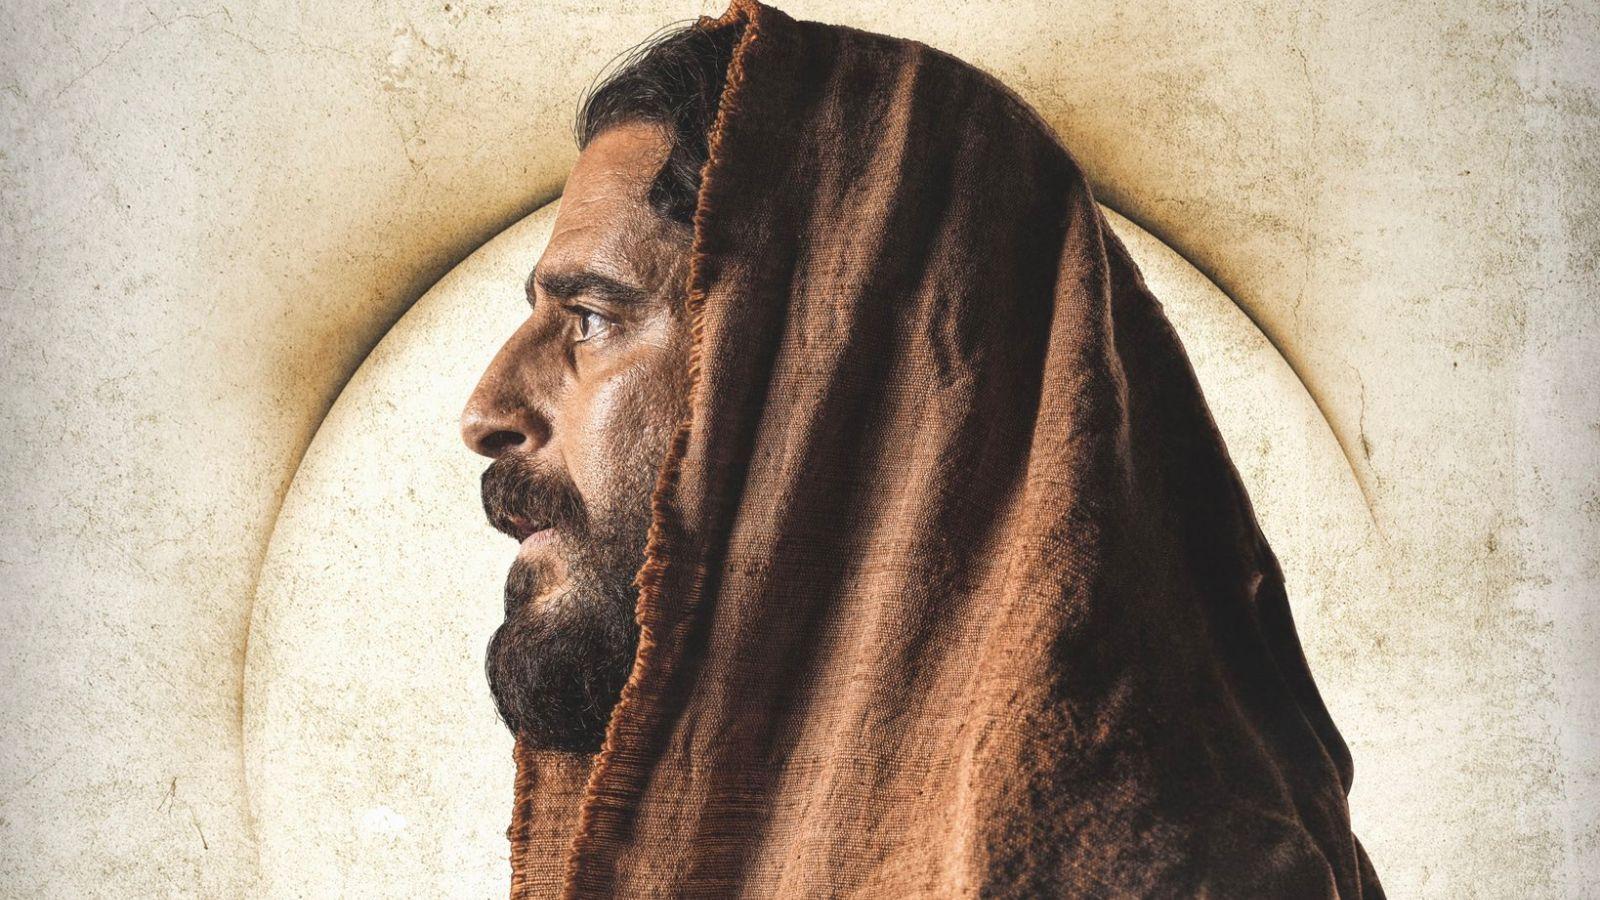 Jonathan Roumie as Jesus in a The Chosen Season 4 character poster.